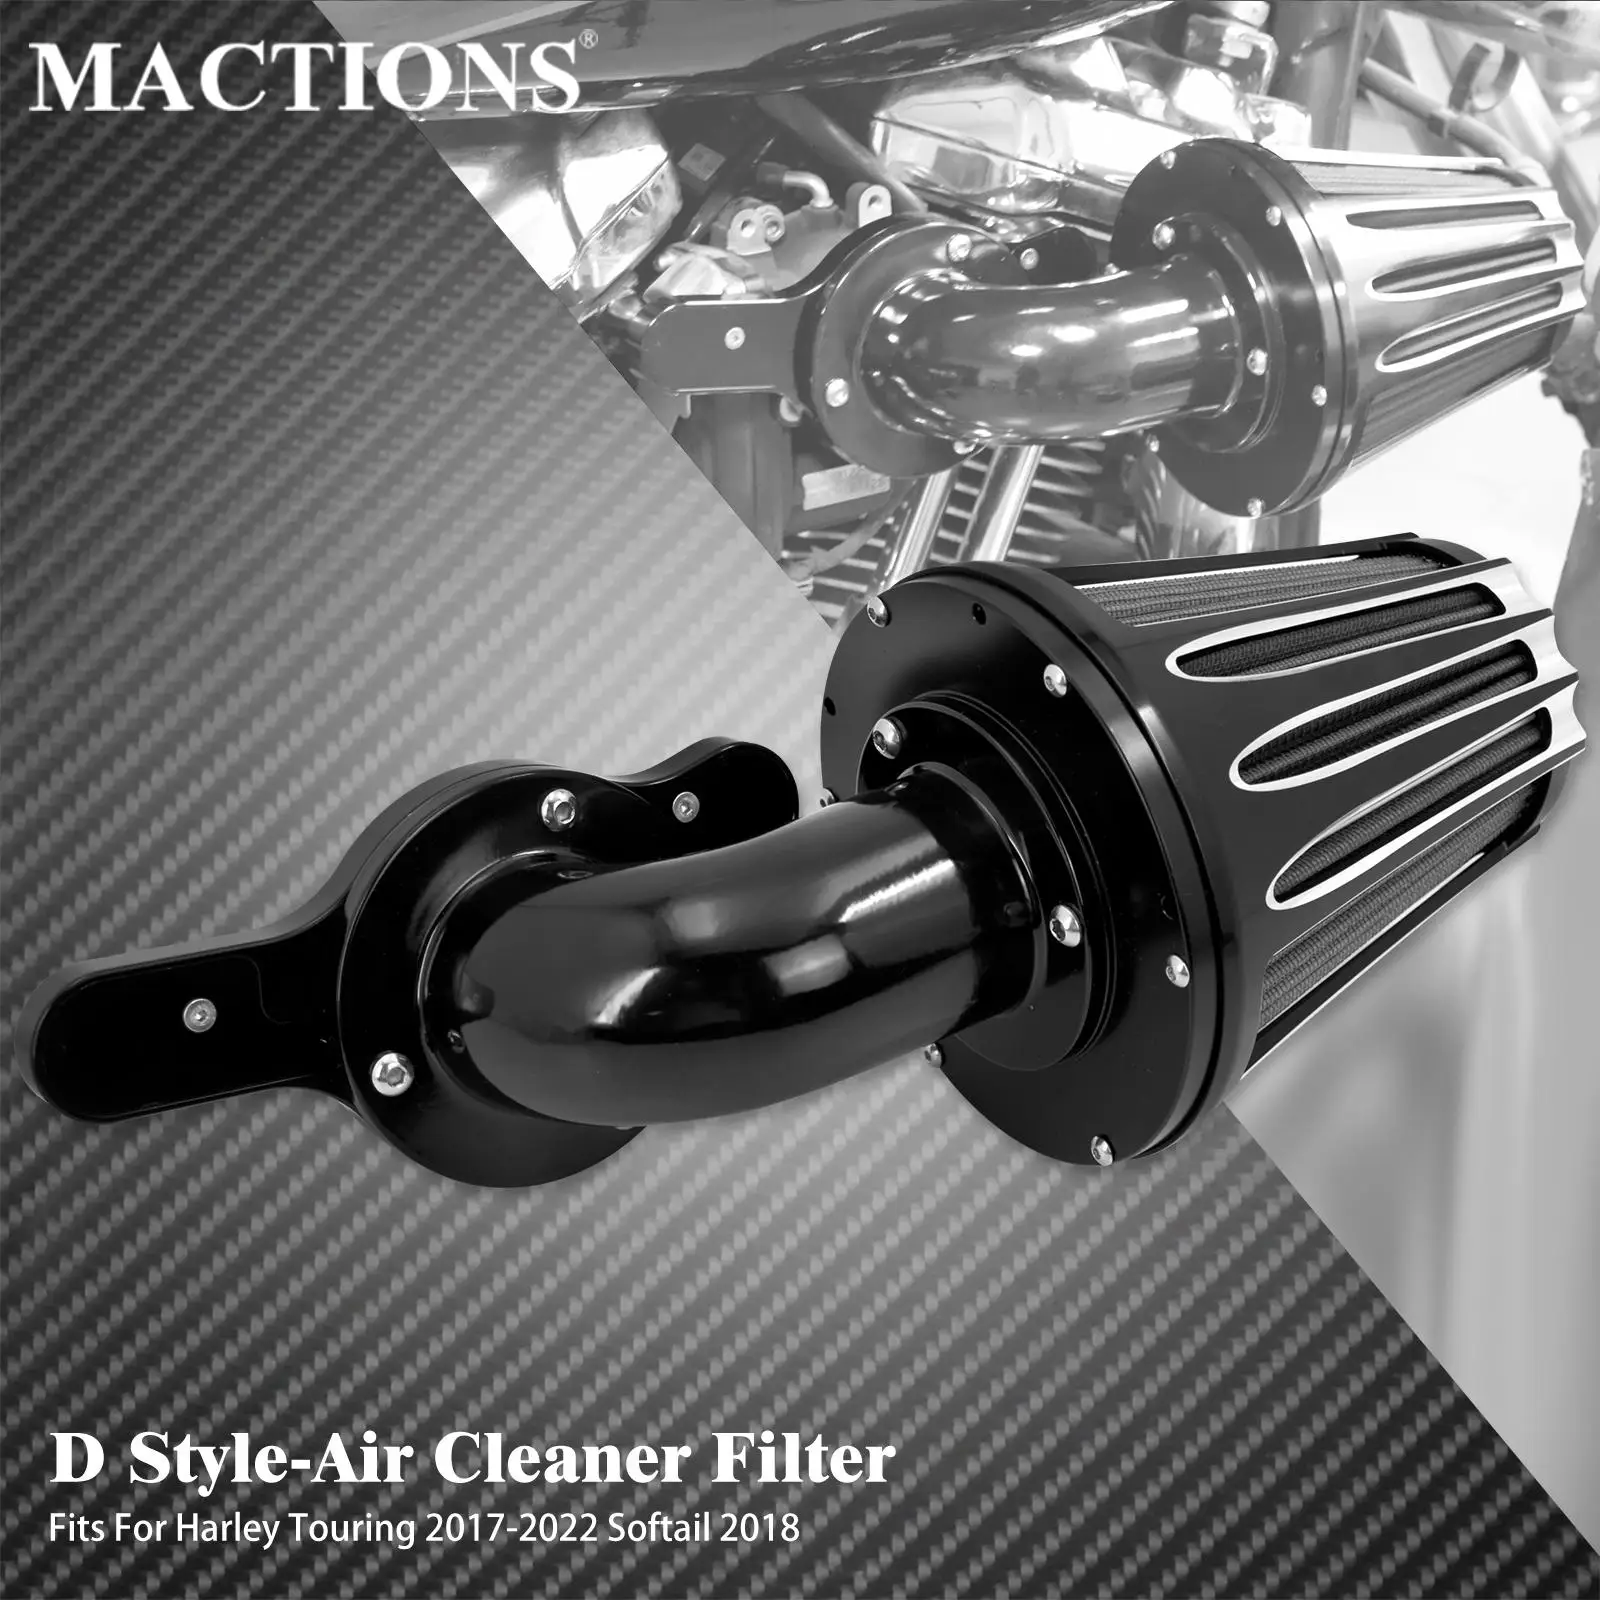 Motorcycle CNC Air Cleaner Black Air Filter For Harley Touring Softail Dyna Road King Electra Street Glide Breakout Low Rider